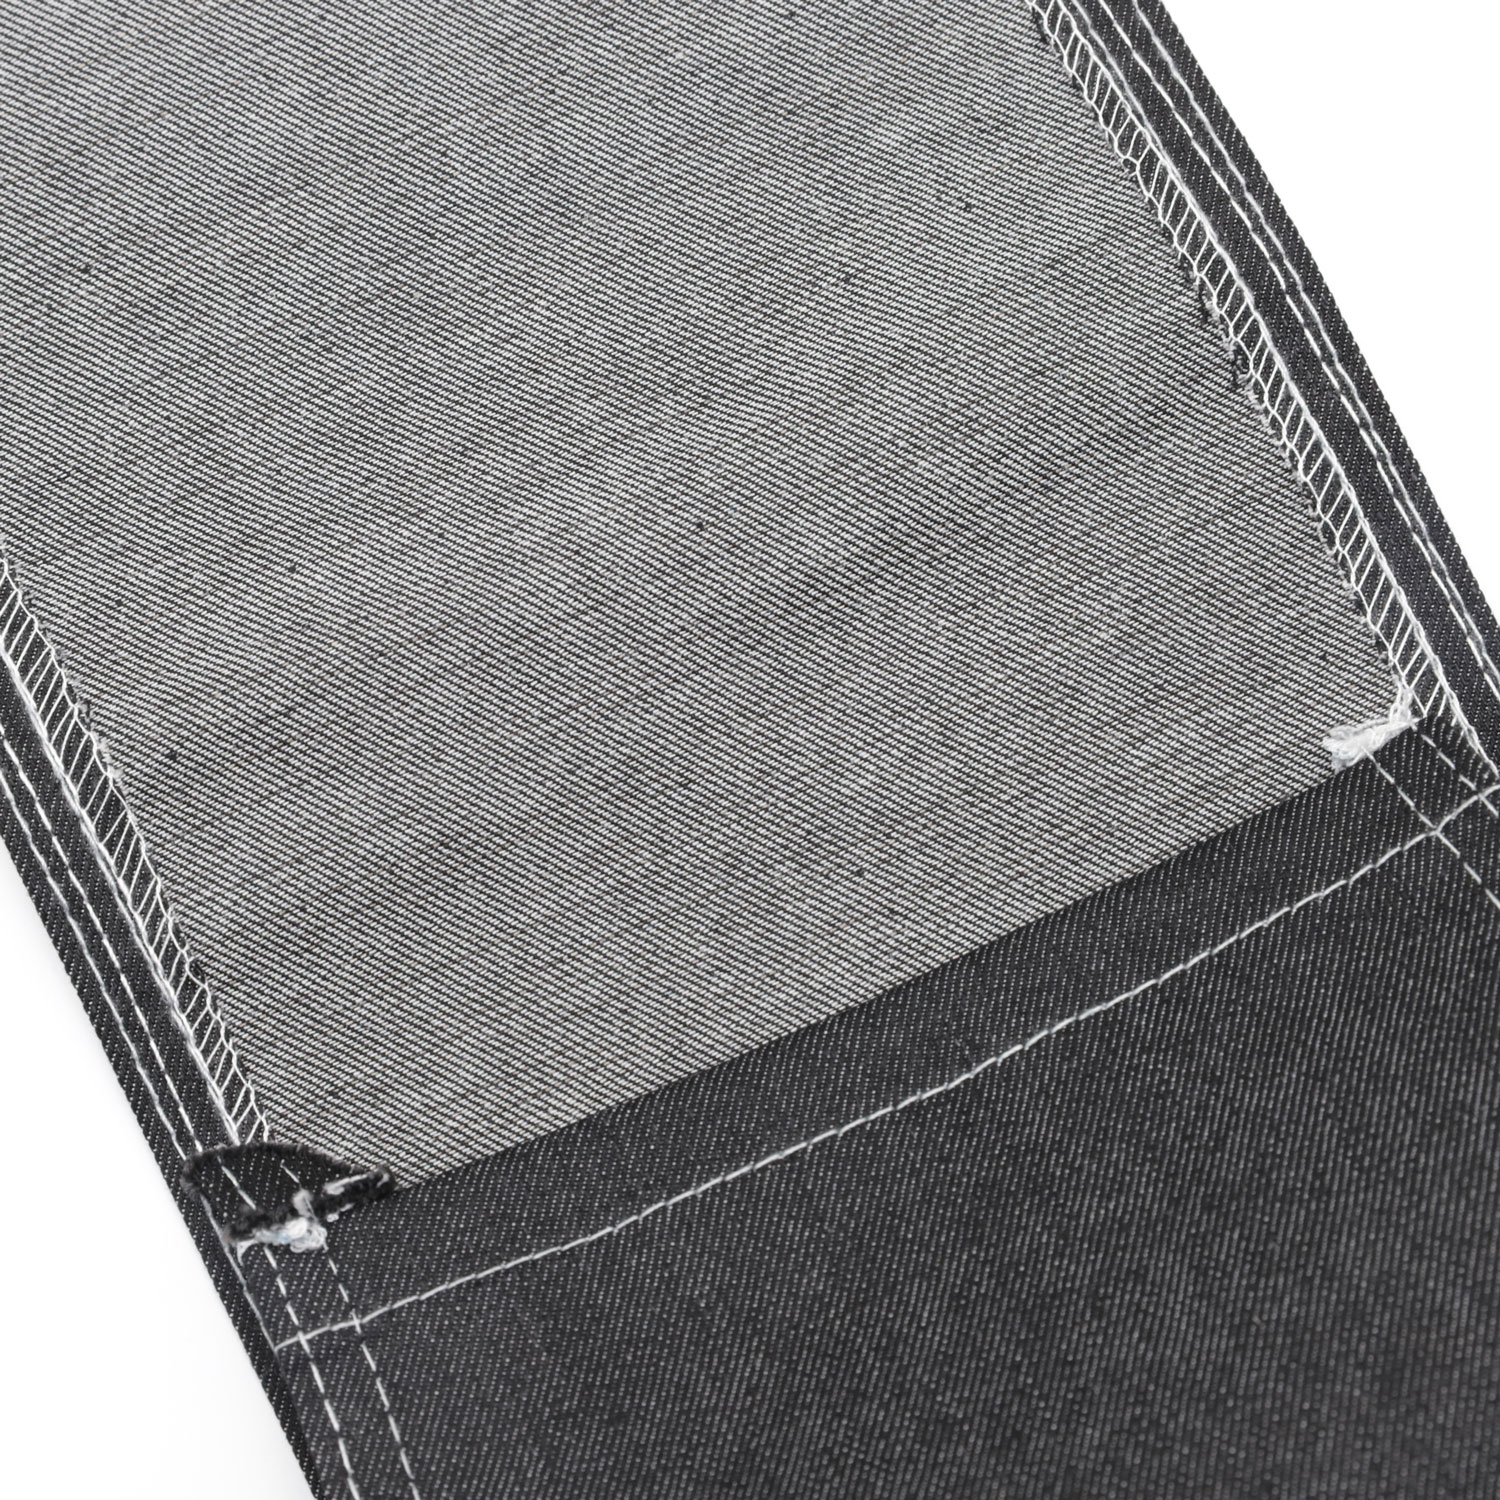 How to Find the Perfect Denim Fabric for Your Project 1